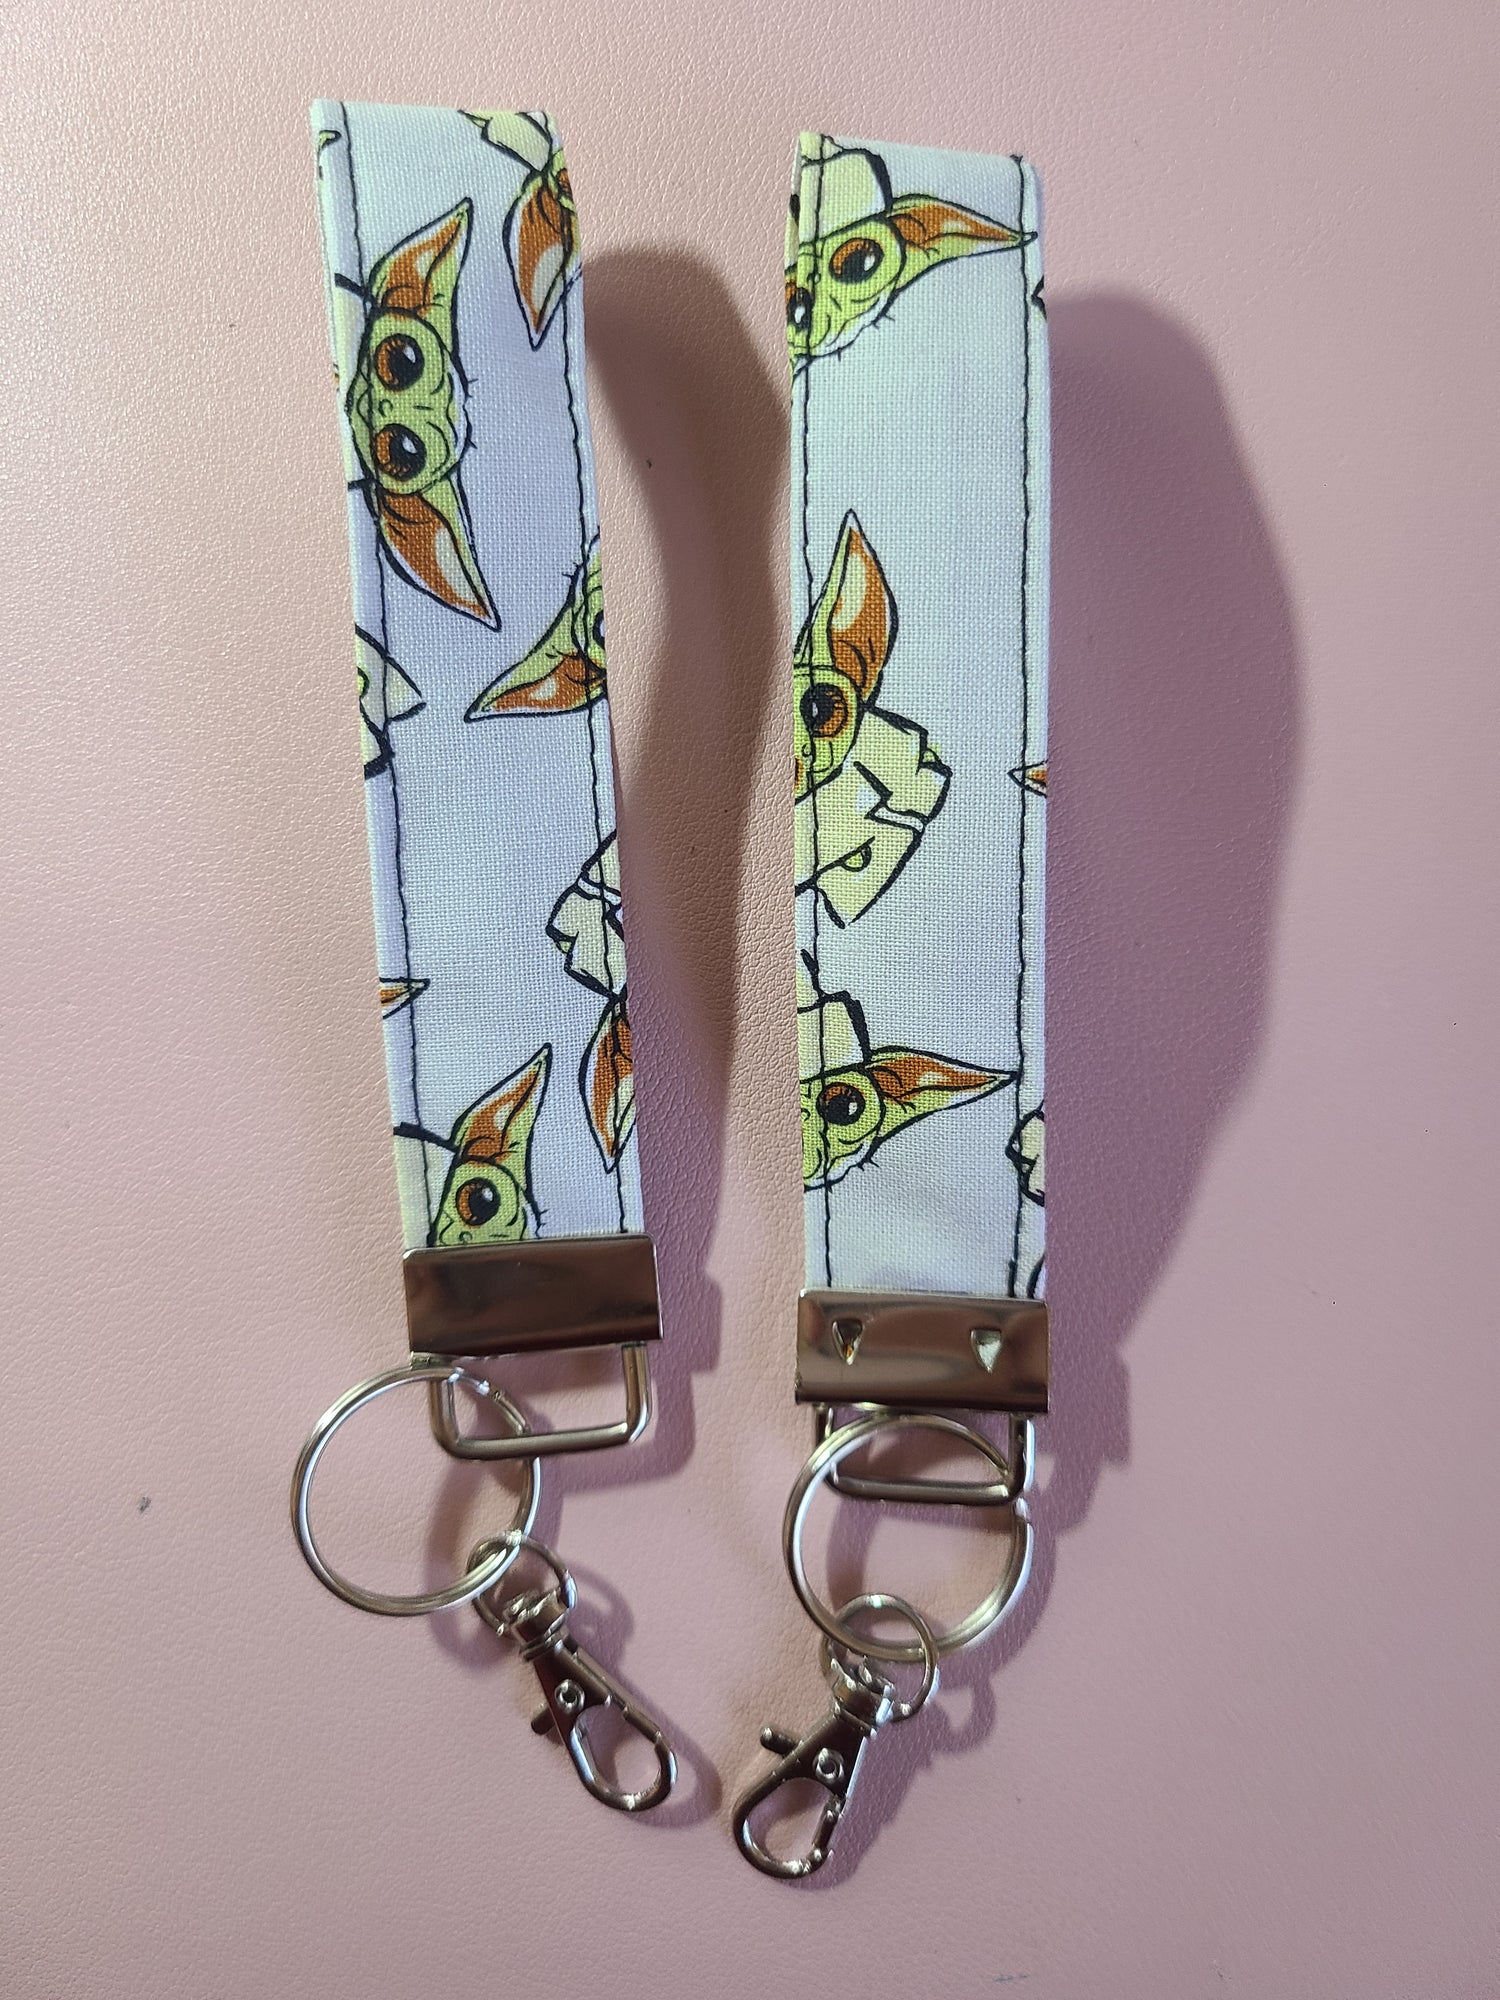 Wristlet Keychain made with Licensed Disney Fabric - Harlow's Store and Garden Gifts